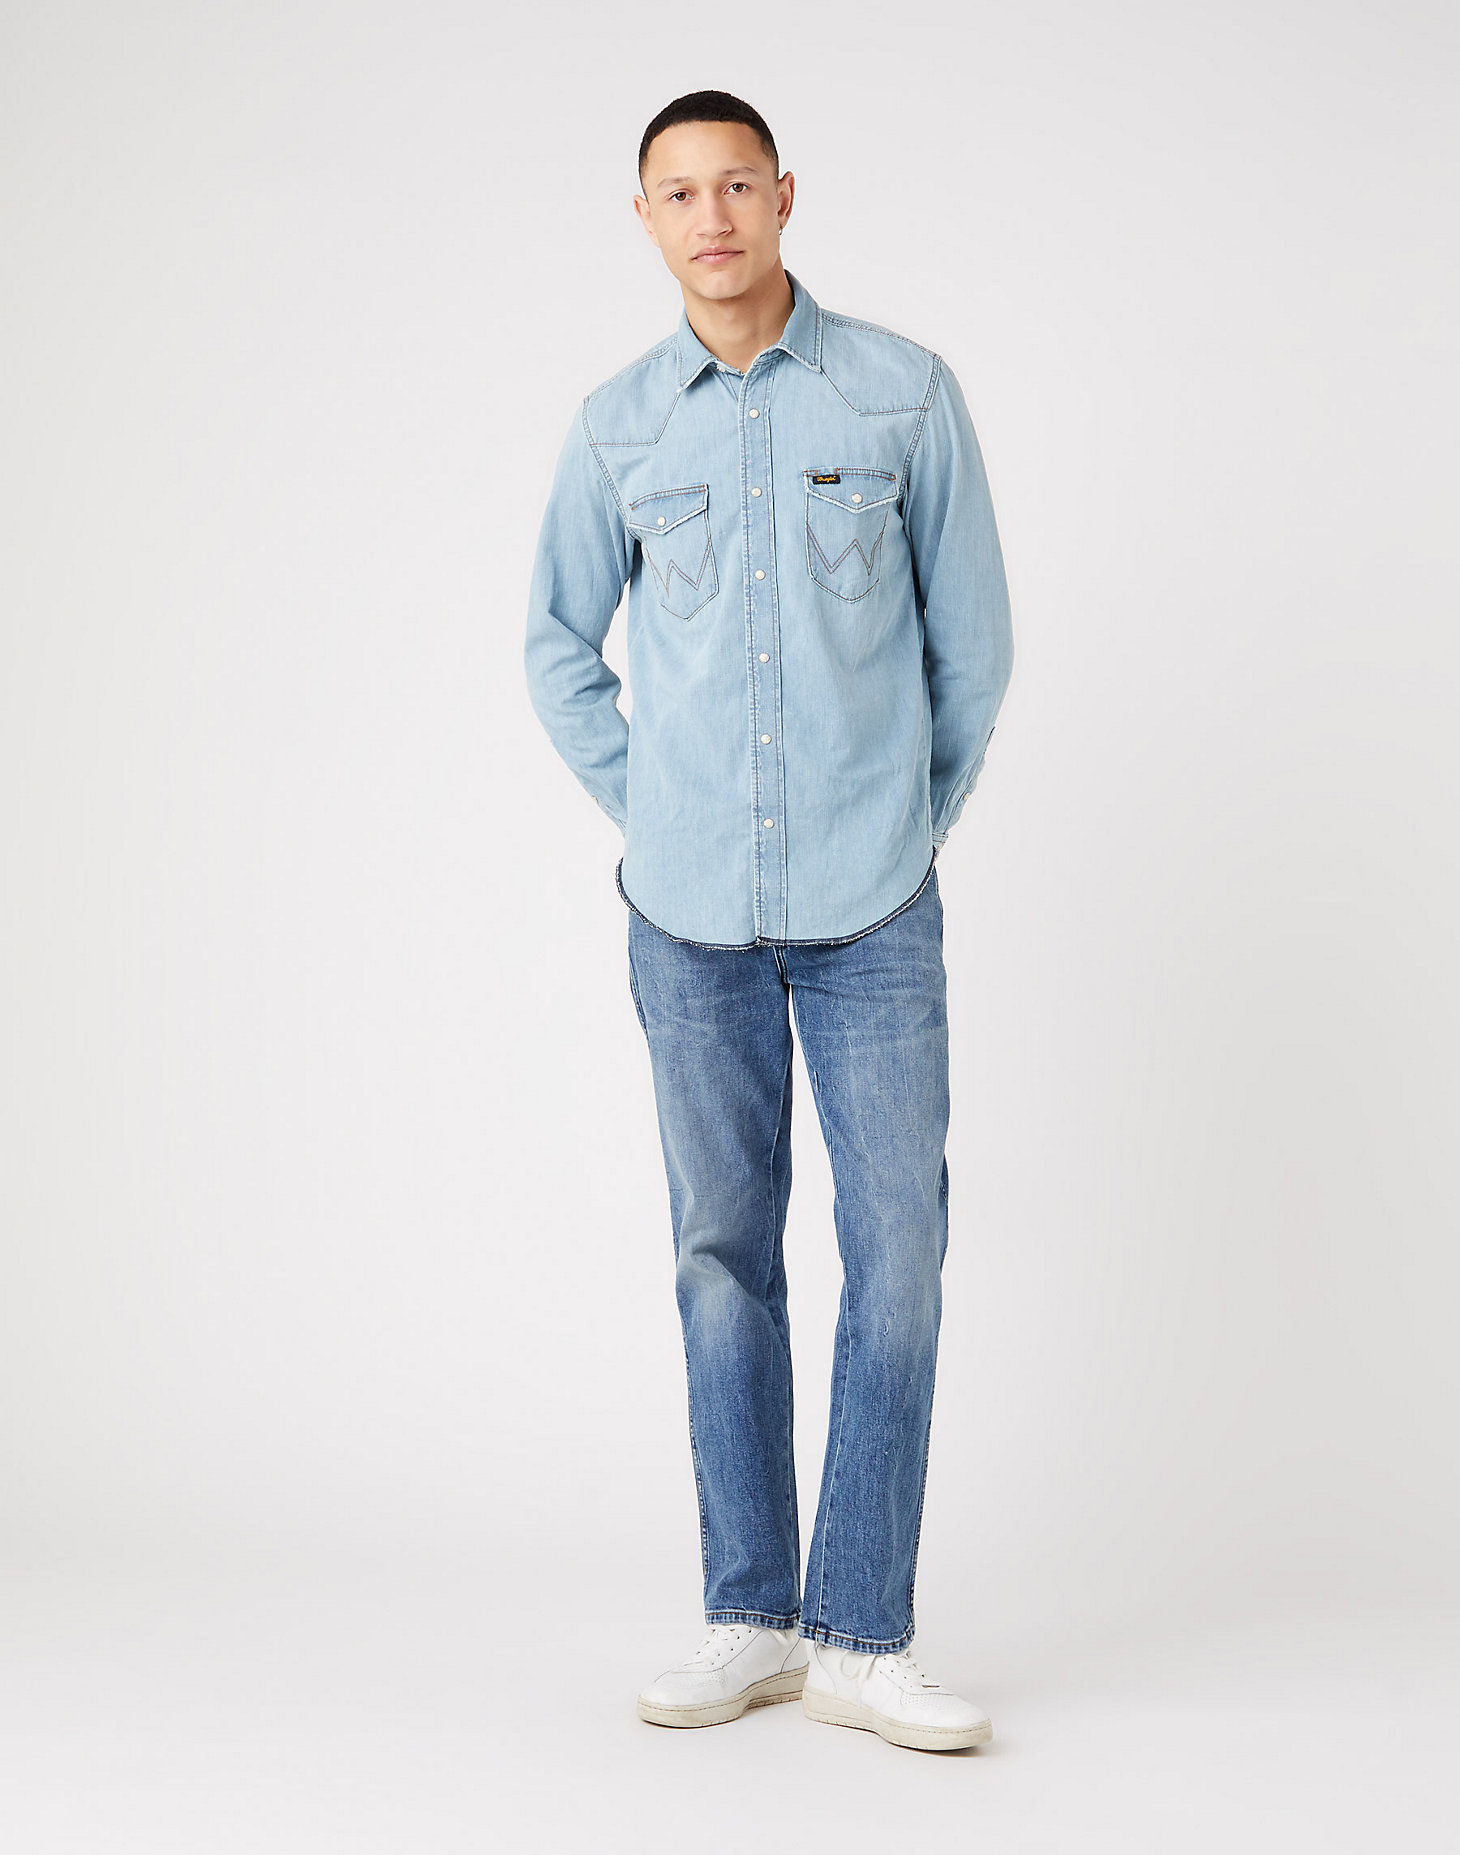 Long Sleeve Workshirt in Icy Blue alternative view 1